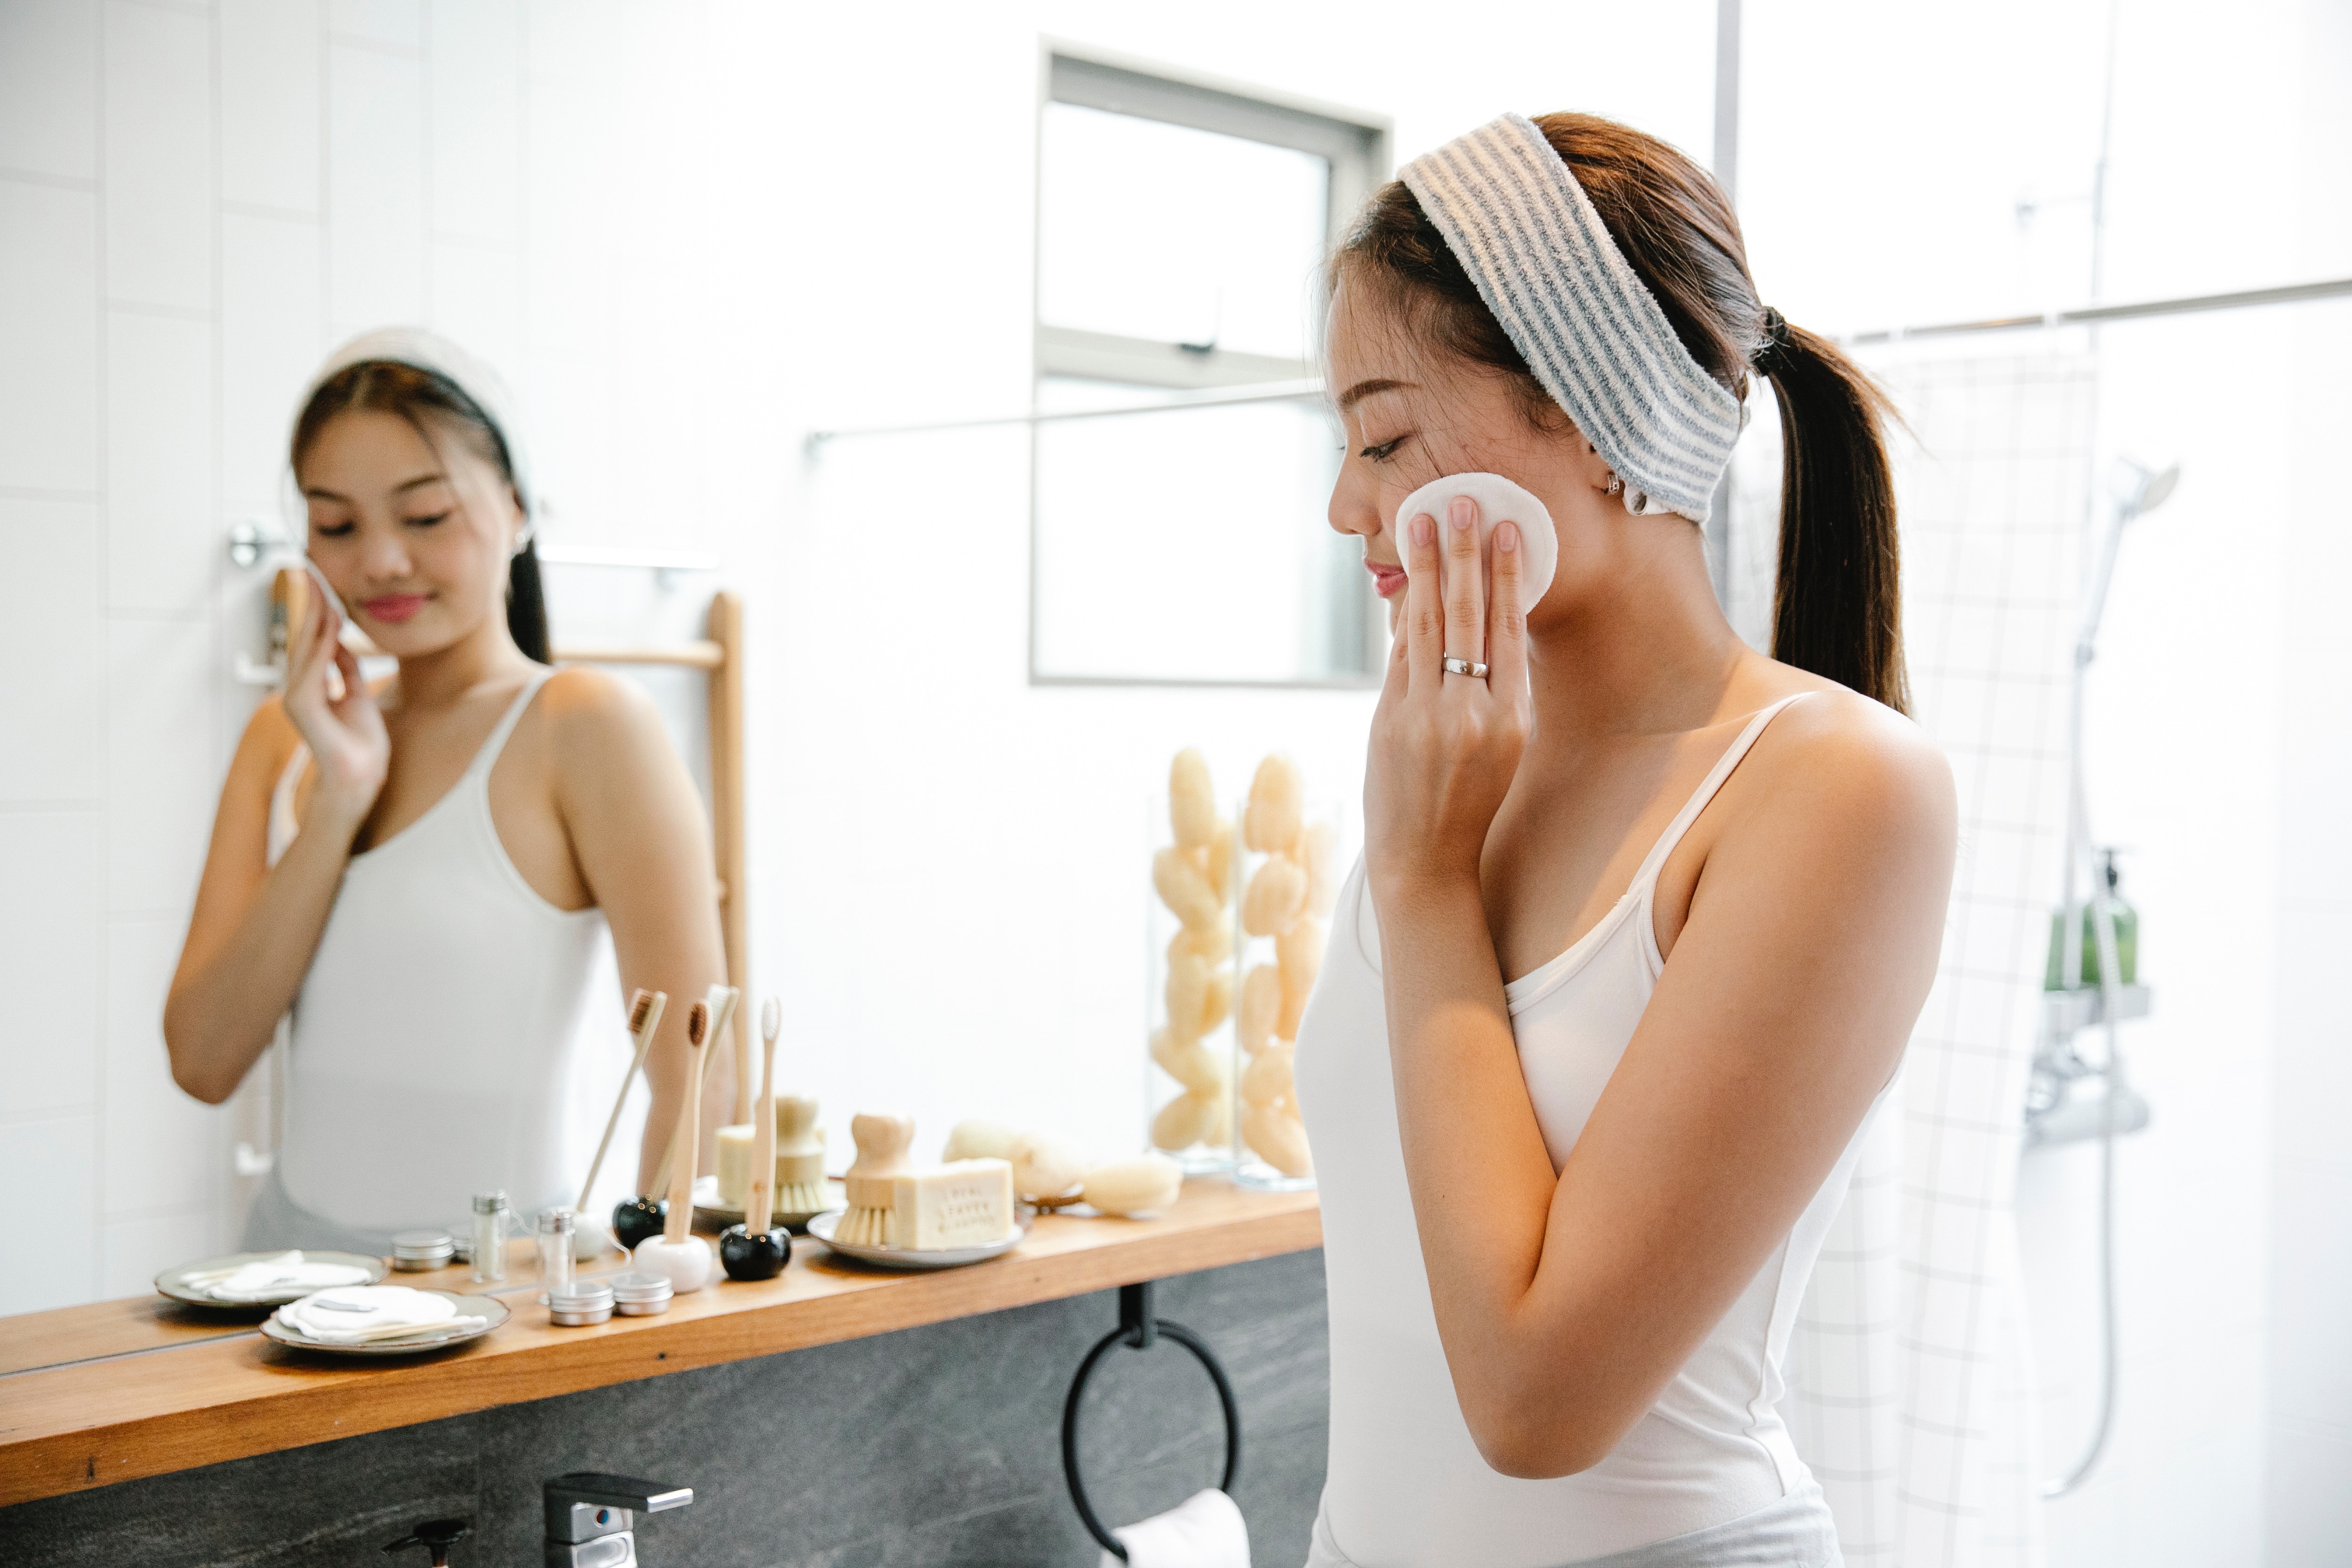 COVID-19 spurs demand for 'healthy' beauty products in China